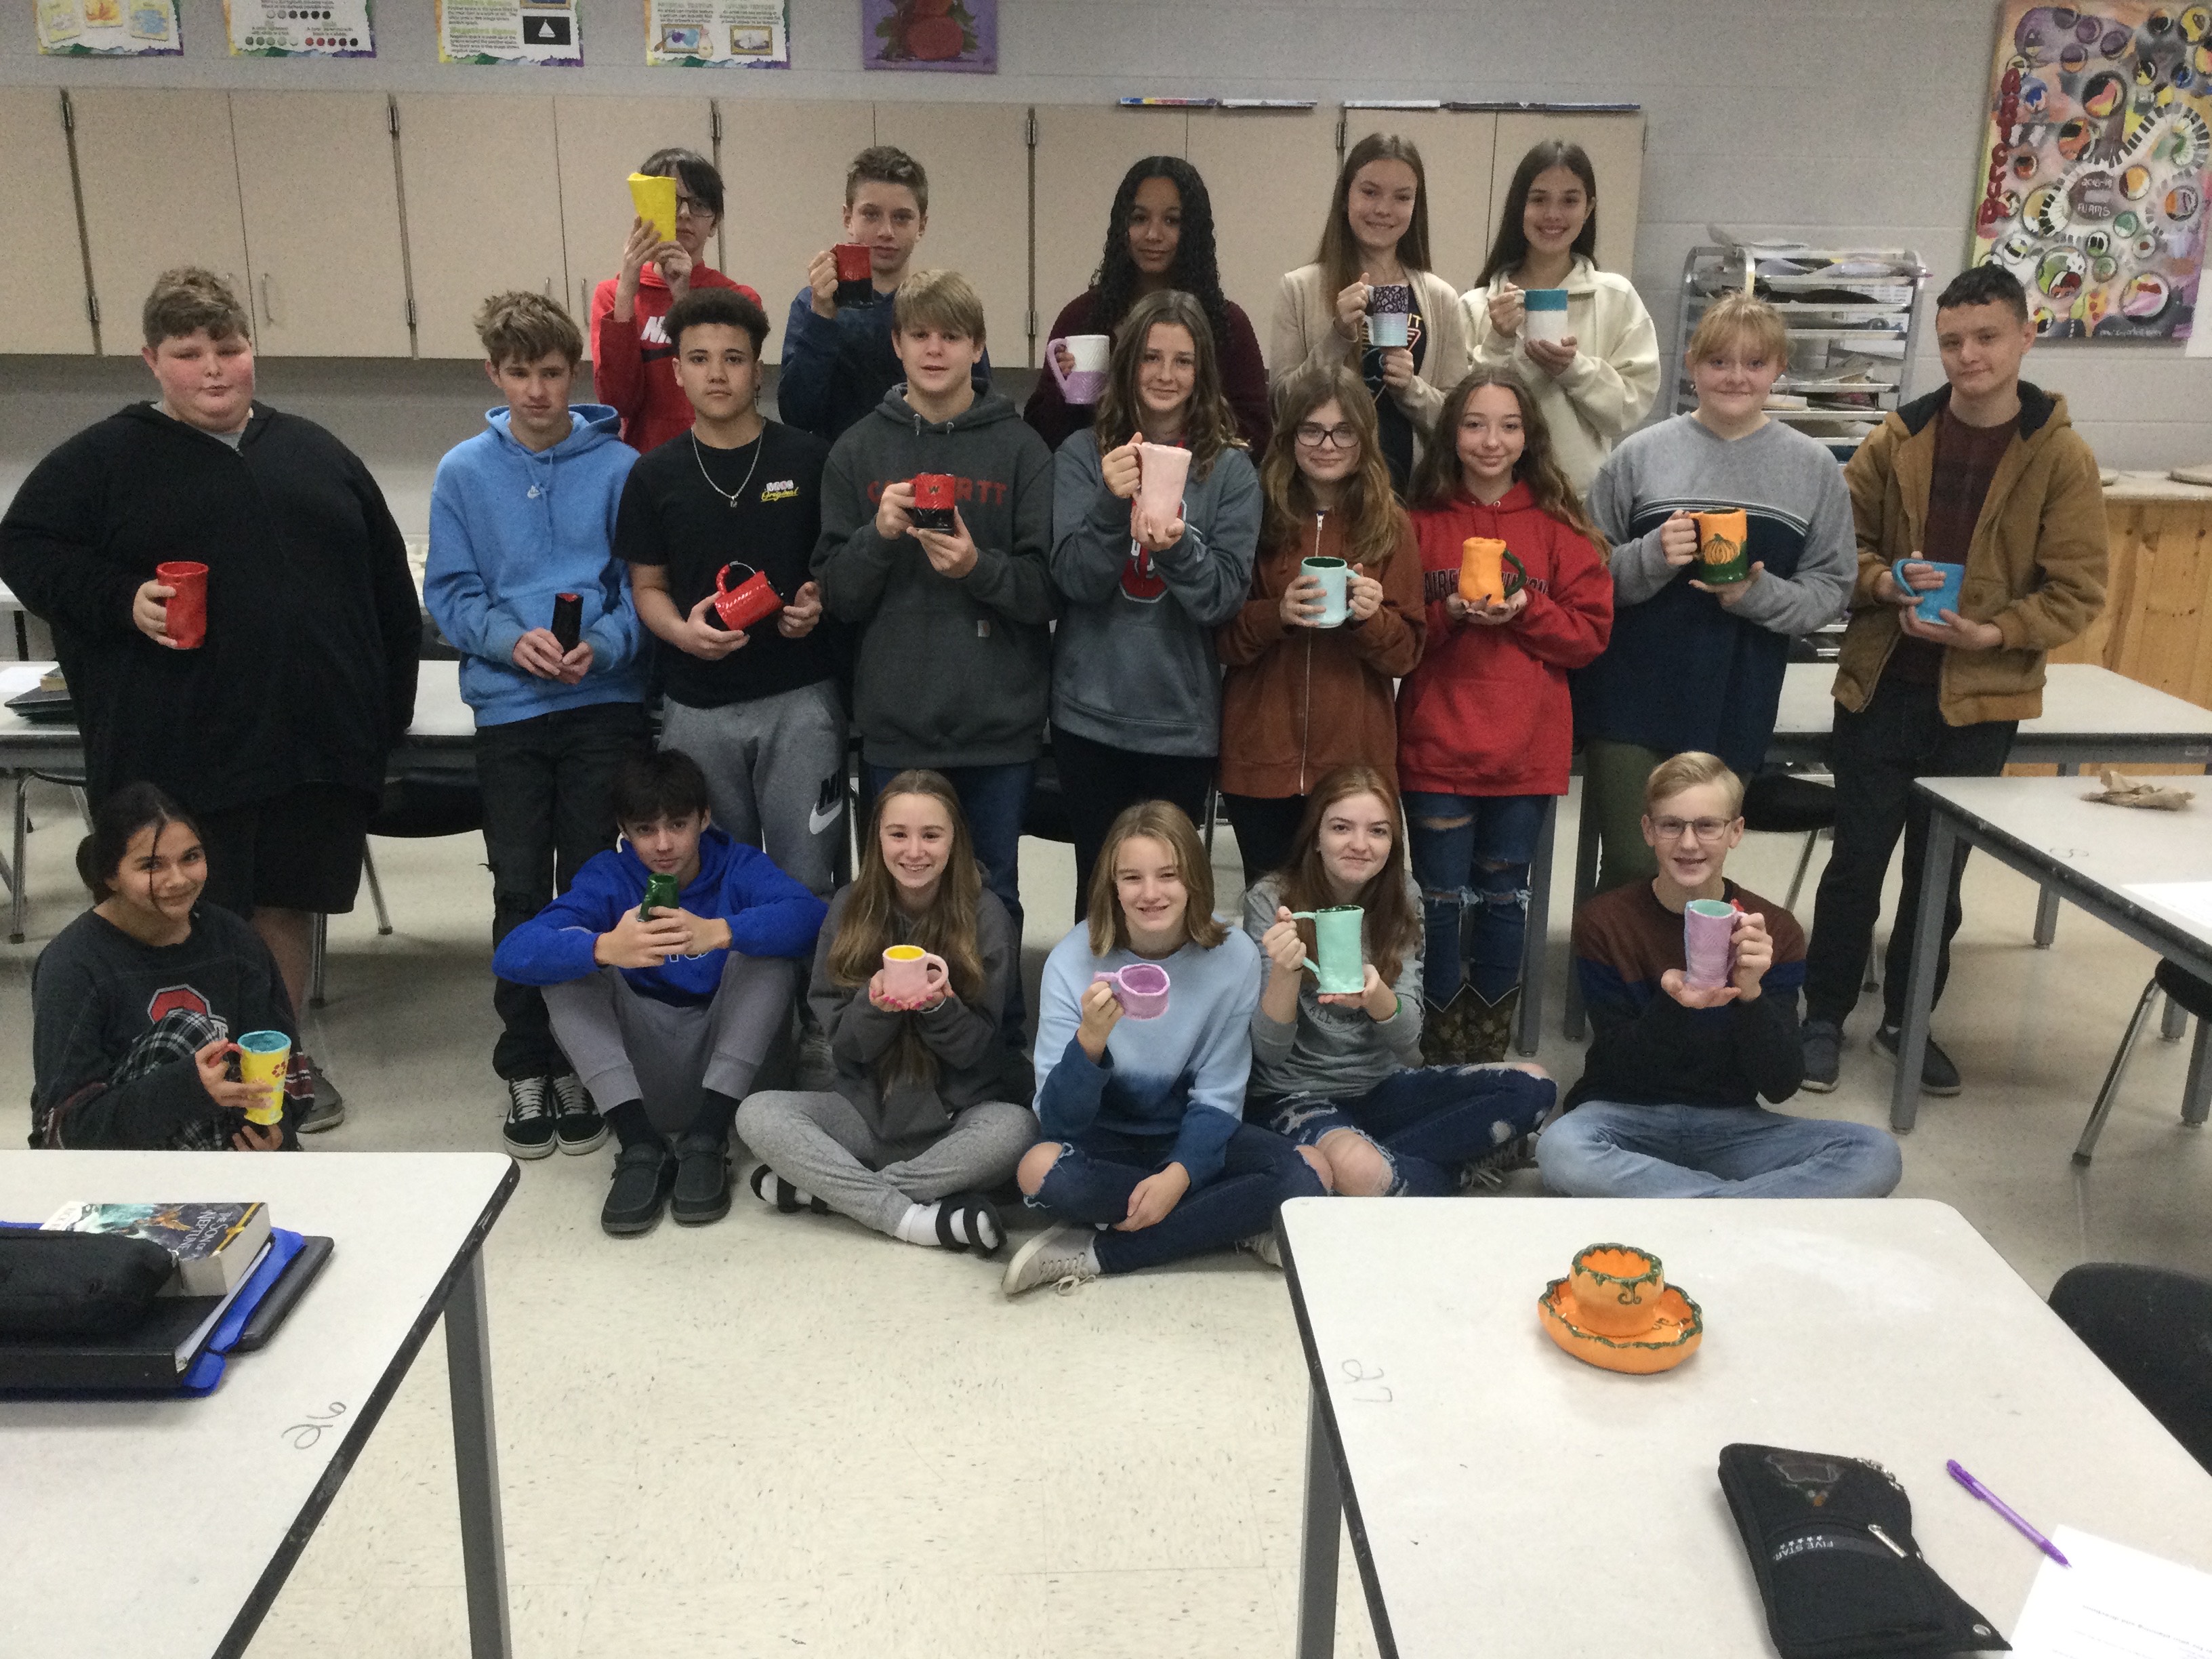 Students pictured in the classroom with their mugs.